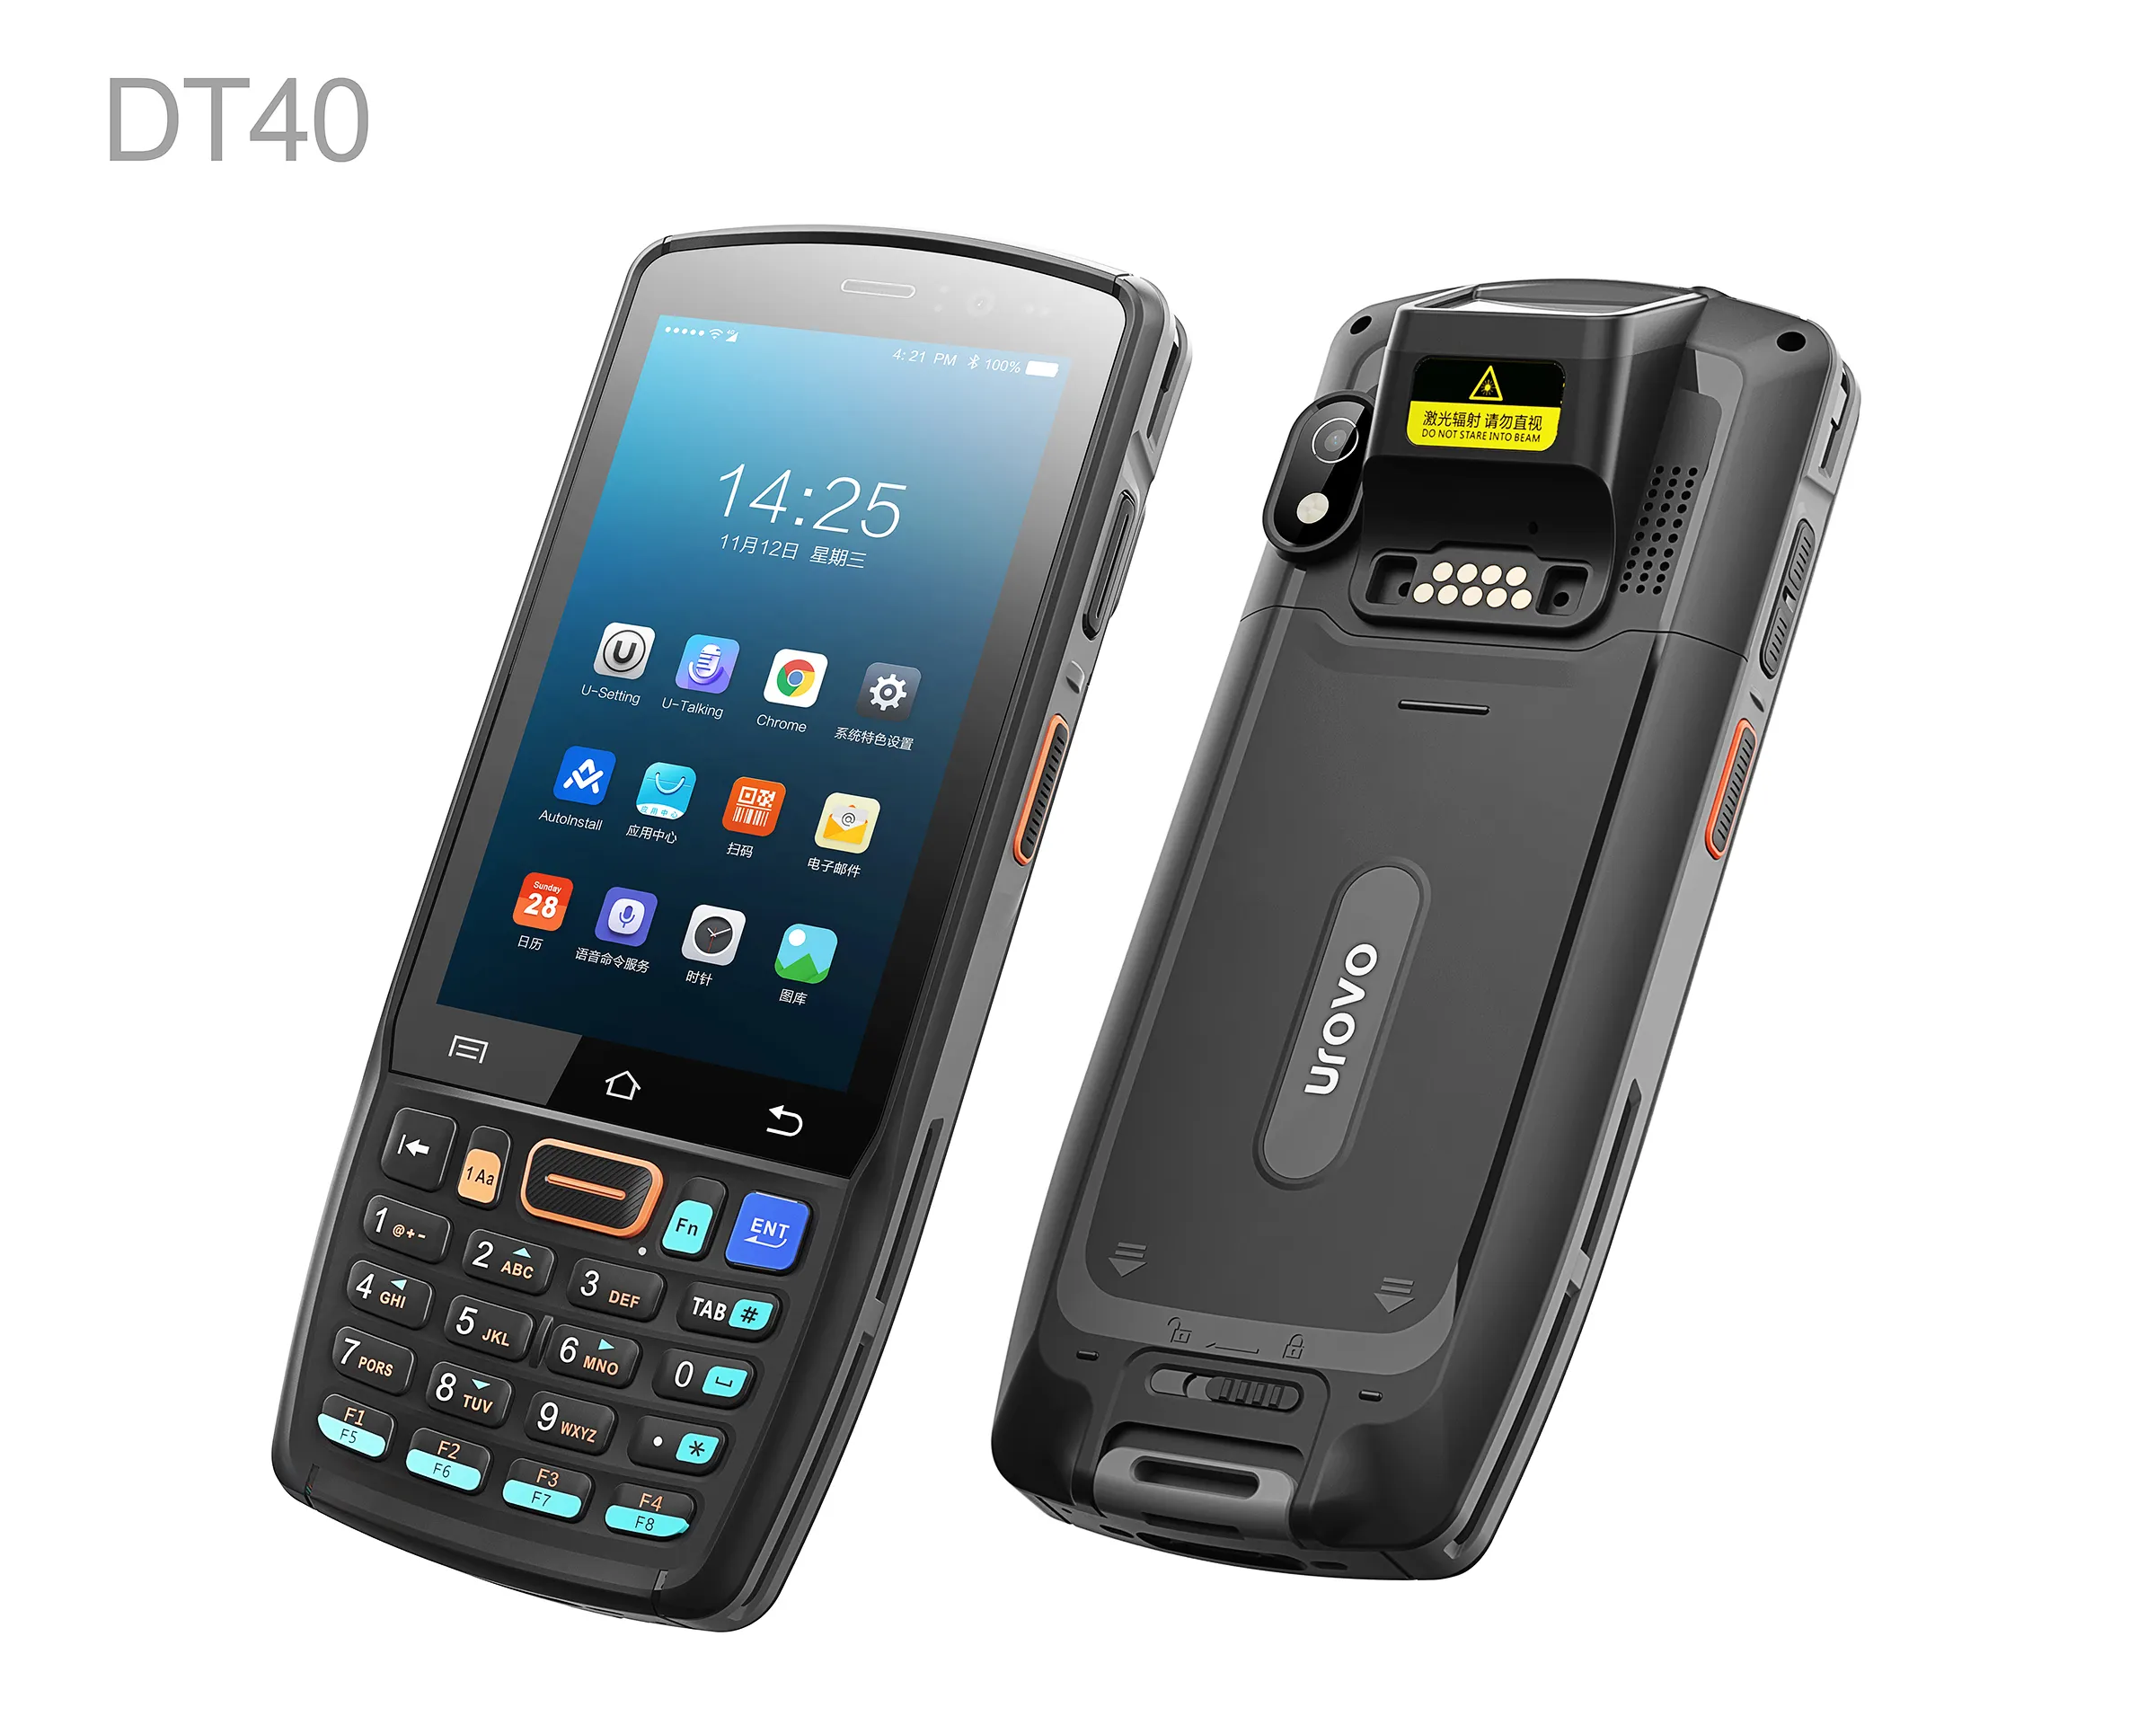 Urovo DT40 Handheld Enterprise mobile computer rugged data terminal Android barcode scanner octa core